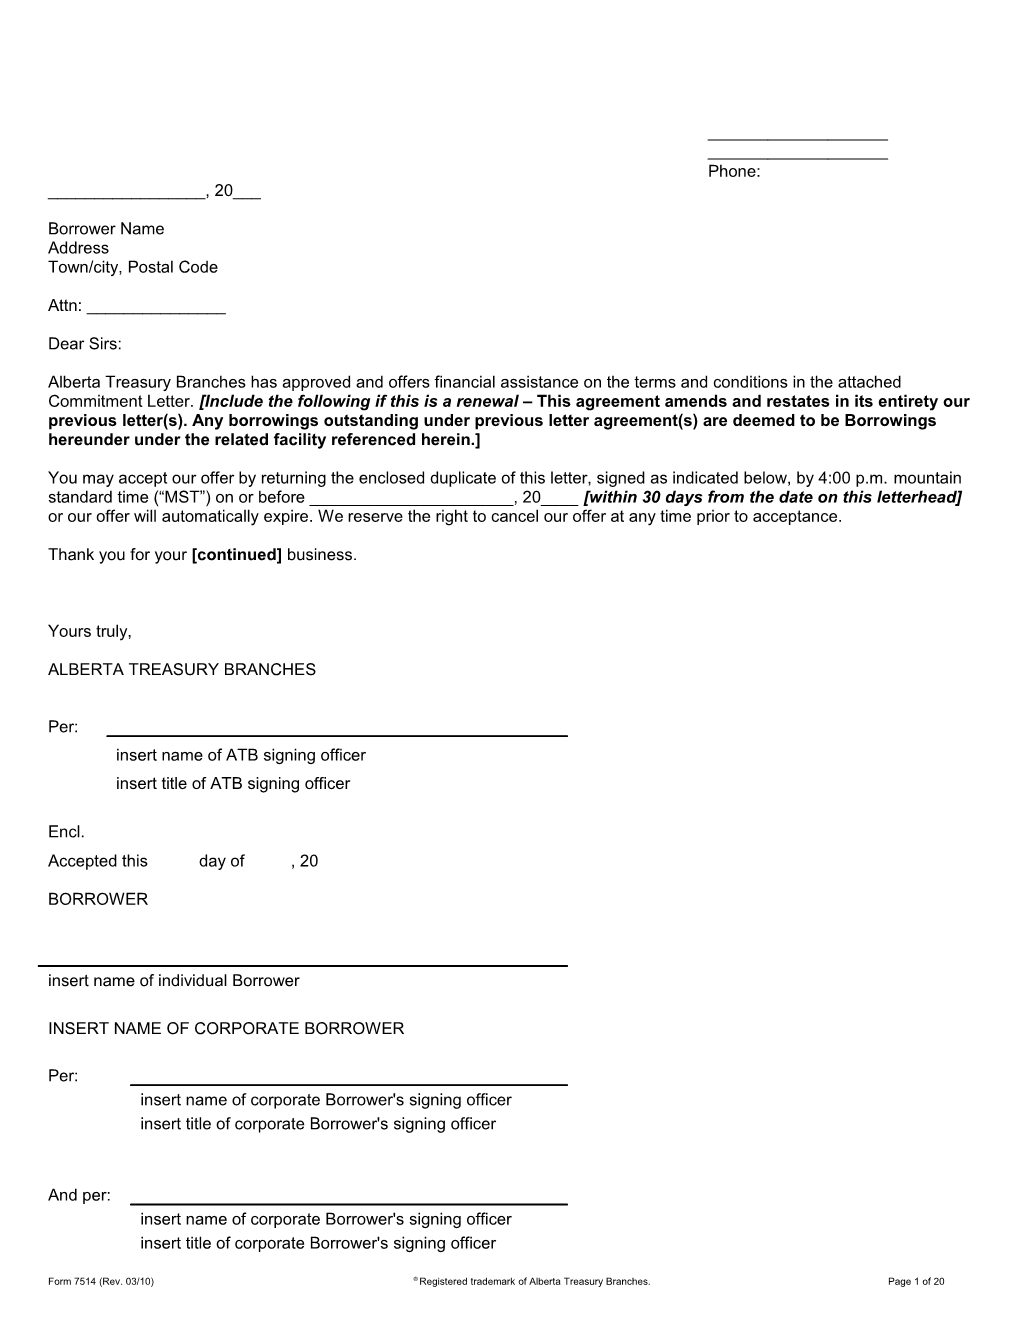 7514 - Commitment Letter - Credit Agreement